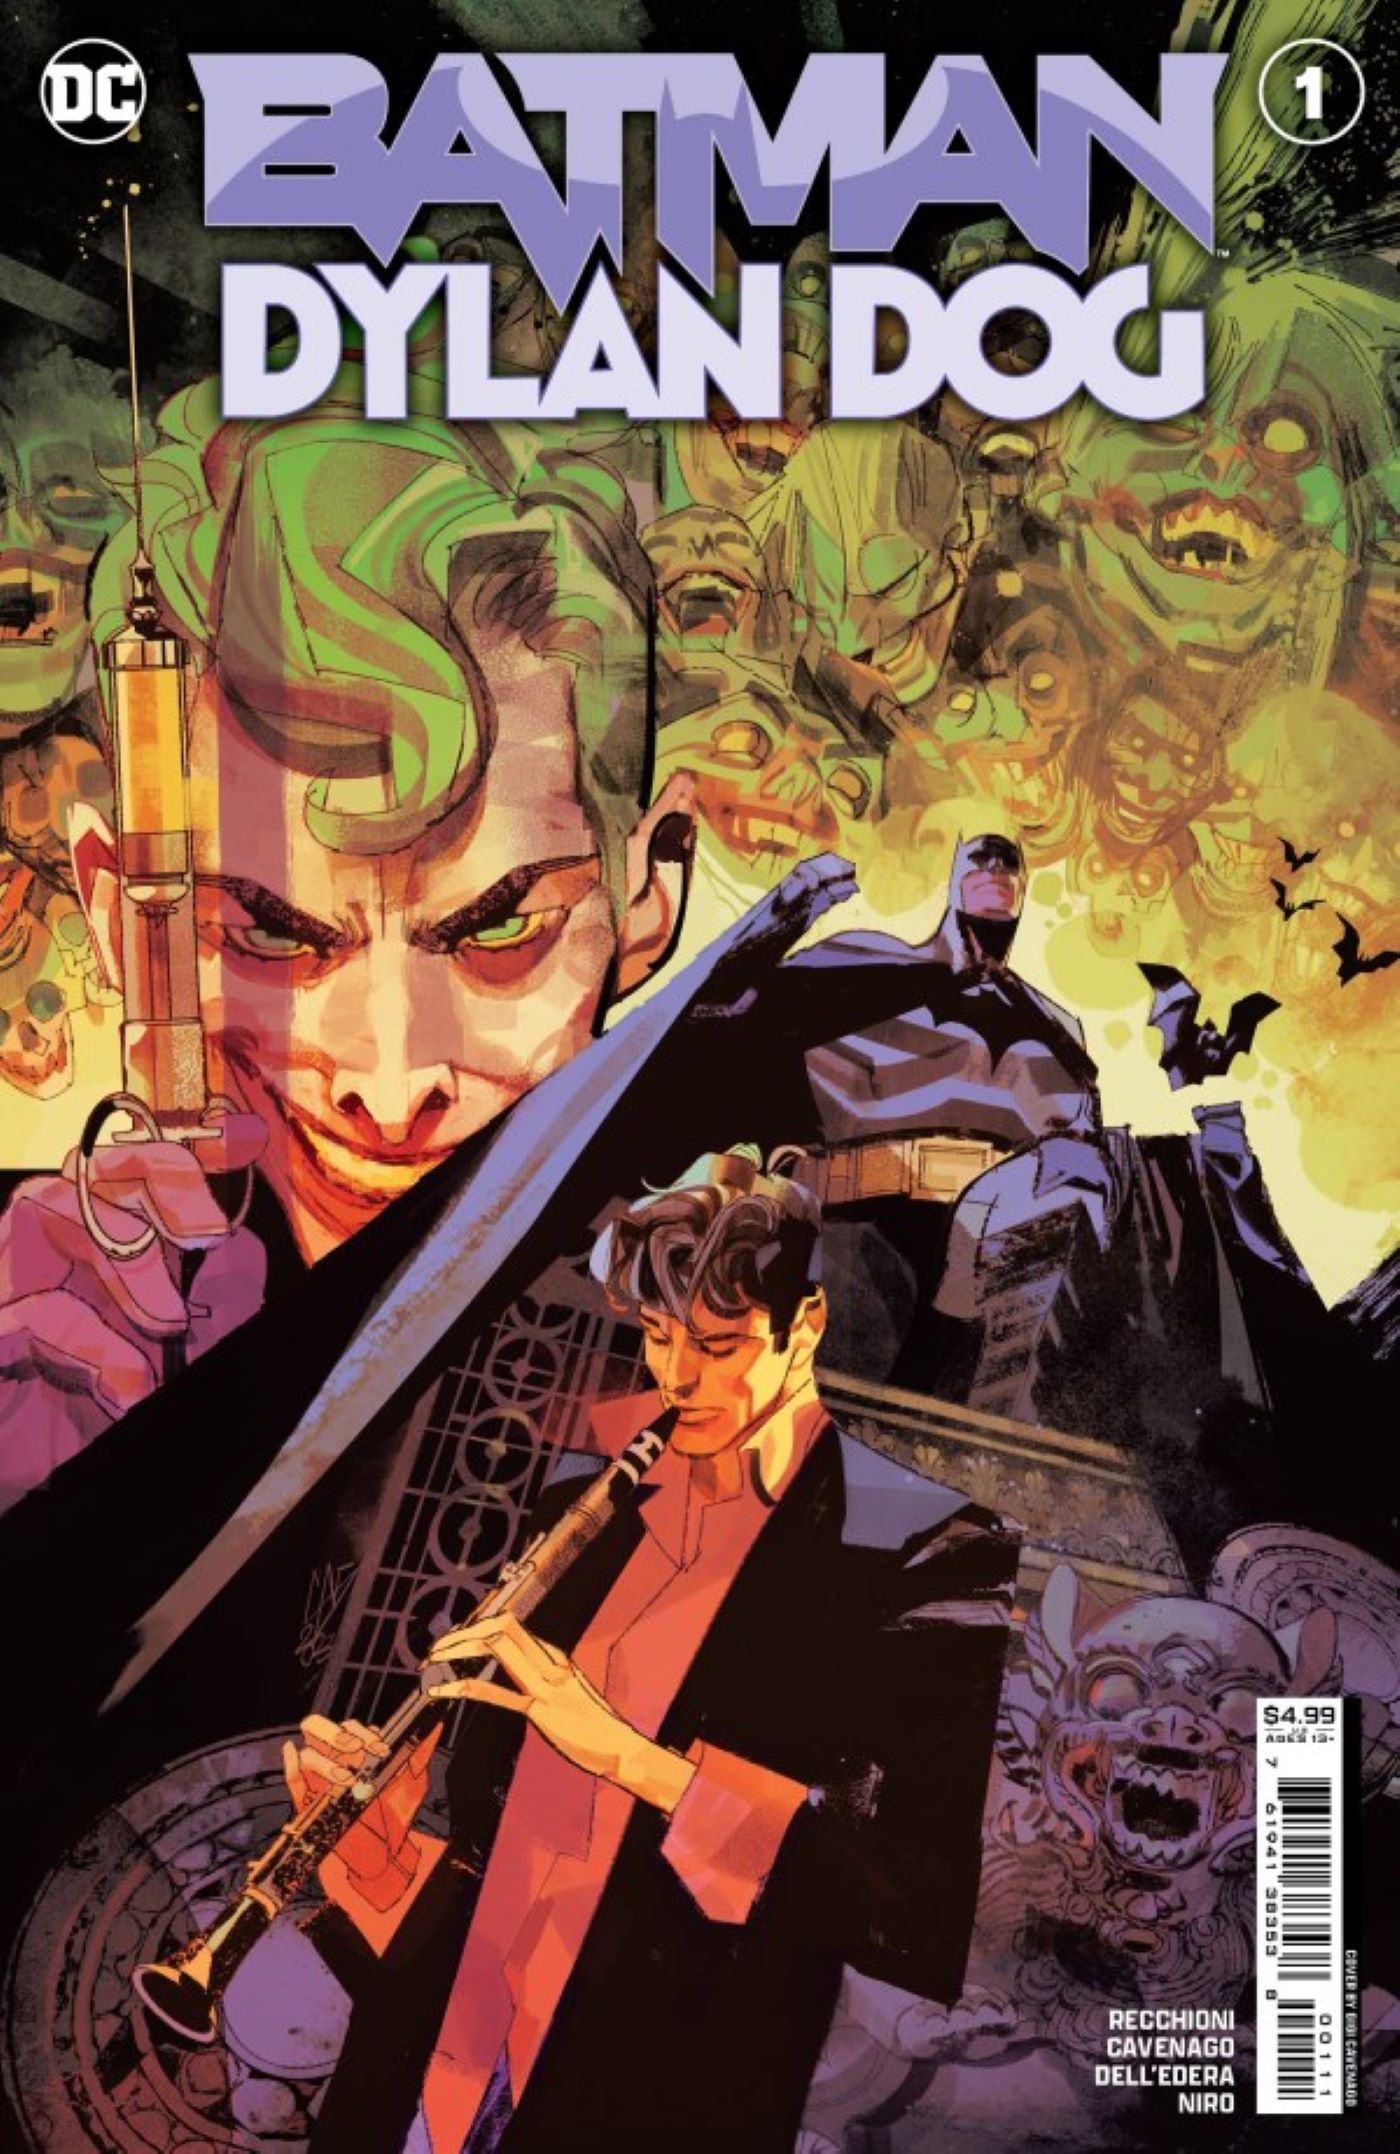 Batman Dylan Dog #1 cover featuring Dylan playing his clarinet, Batman face, and Joker with a syringe